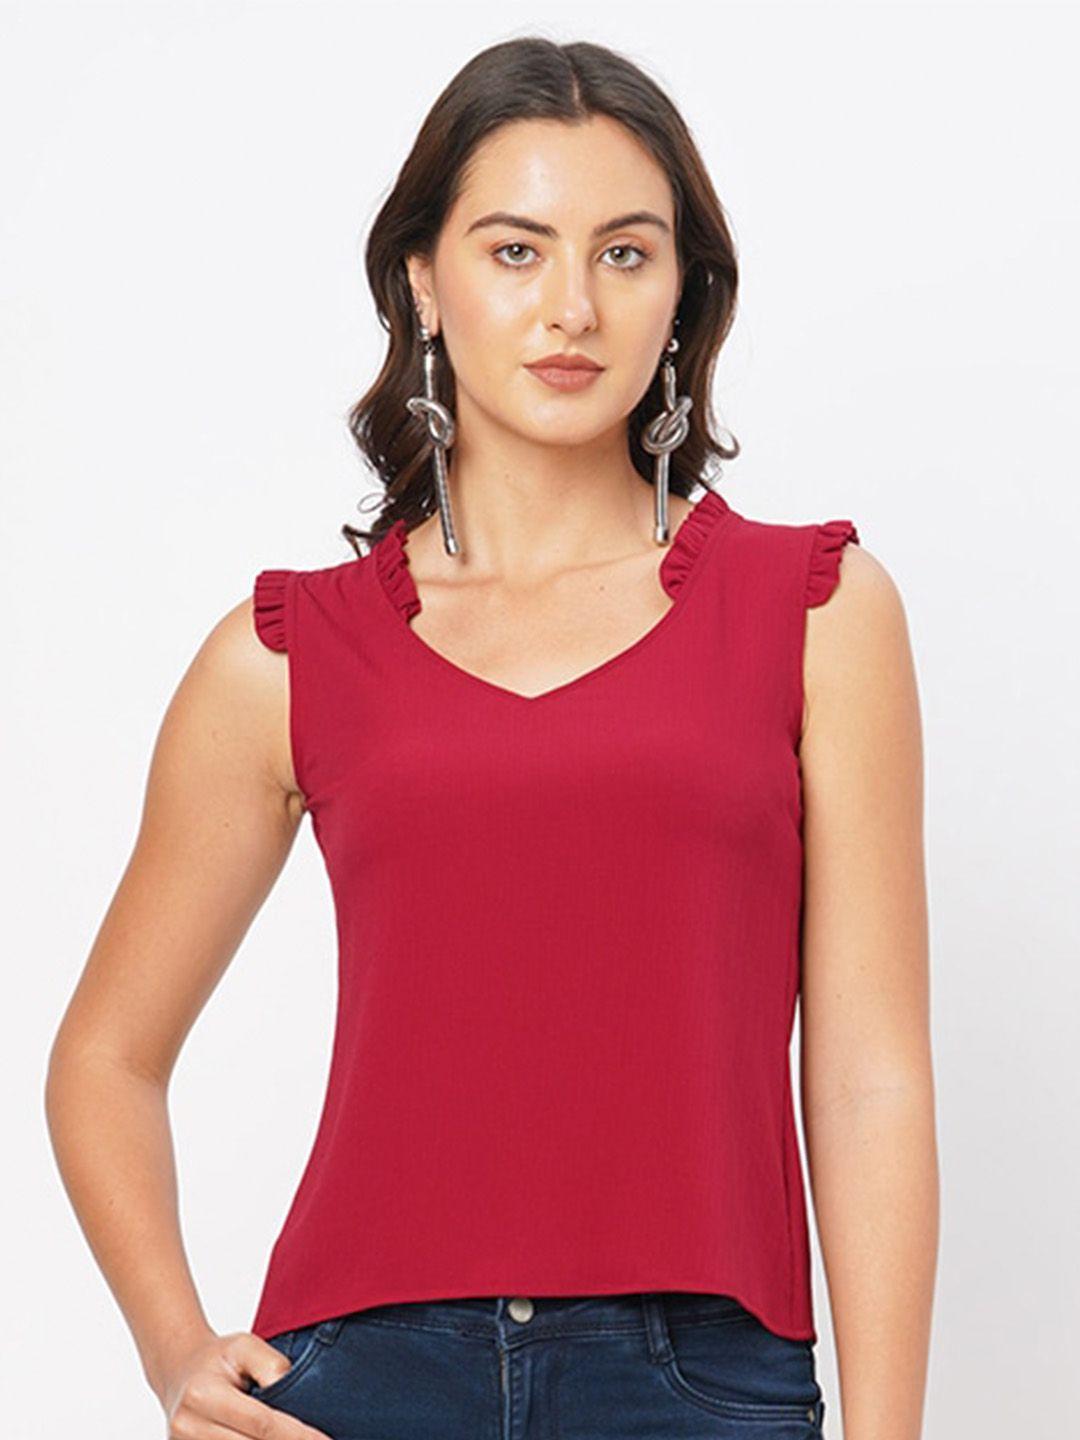 curves by mish v-neck ruffles georgette top